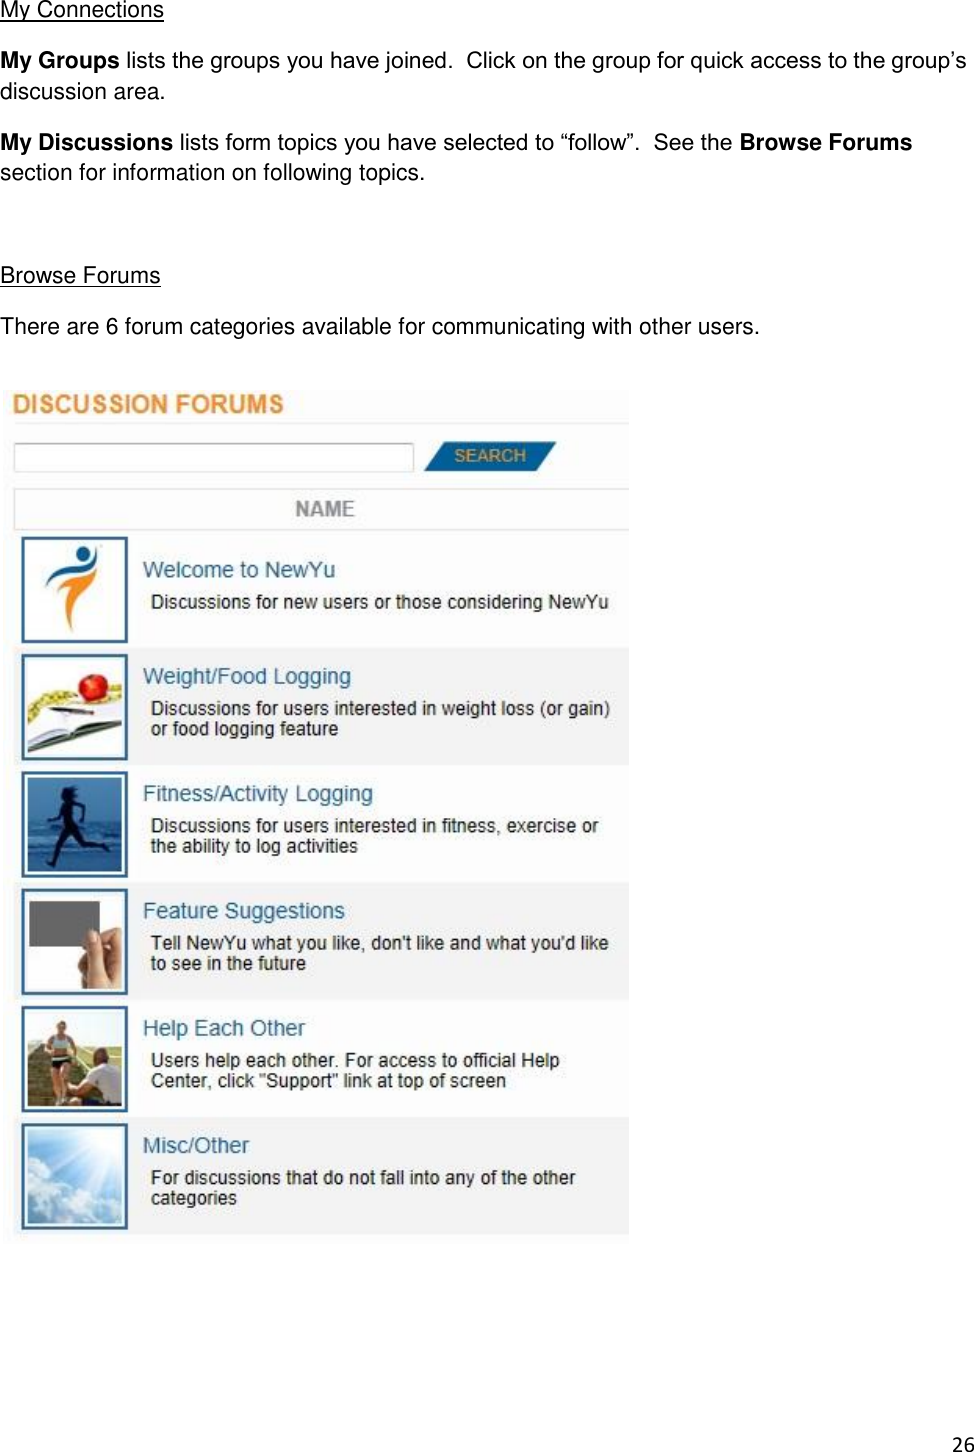 26 My Connections My Groups lists the groups you have joined.  Click on the group for quick access to the group’s discussion area. My Discussions lists form topics you have selected to “follow”.  See the Browse Forums section for information on following topics.  Browse Forums There are 6 forum categories available for communicating with other users.   